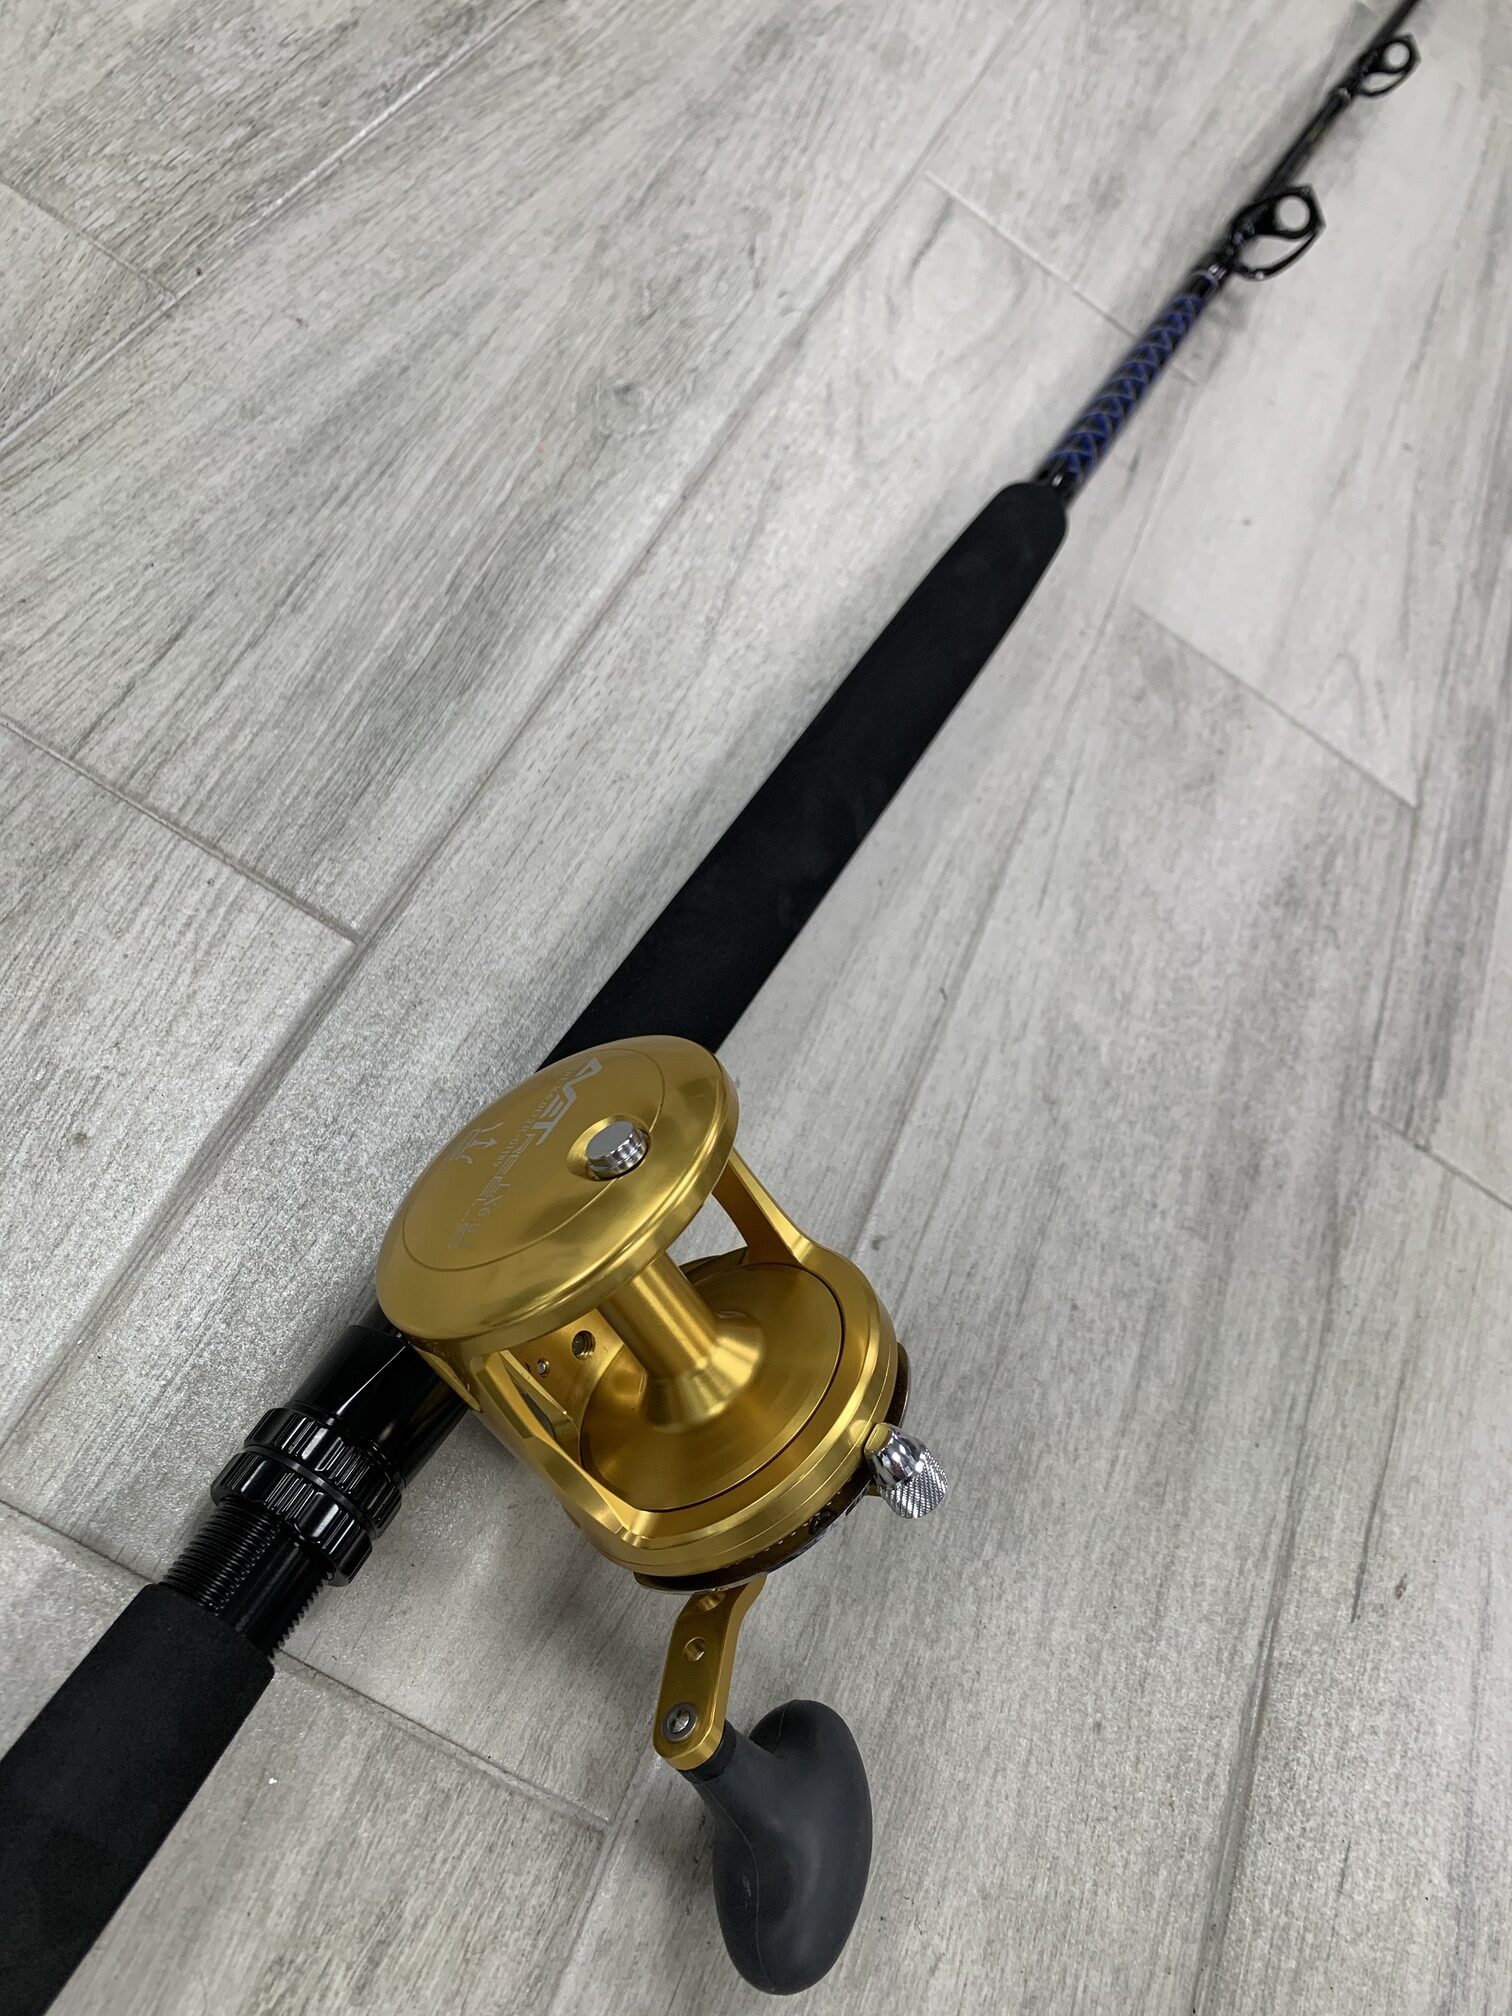 7′ Kingfish 20-50 Live Bait and Bottom Fishing Rod with Avet LX G2 Gold Reel  – Connley Fishing